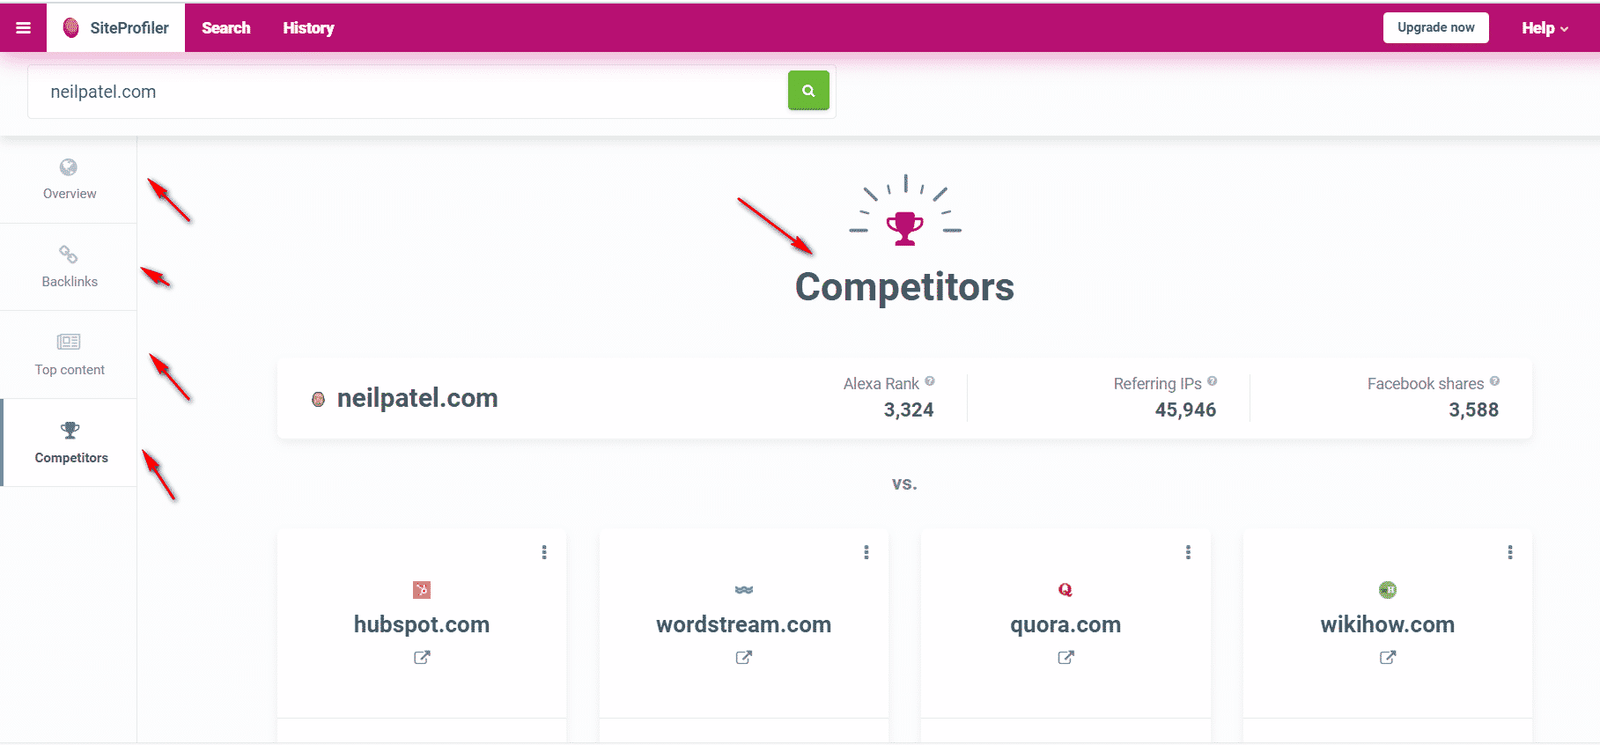 Competitors in Kwfinder